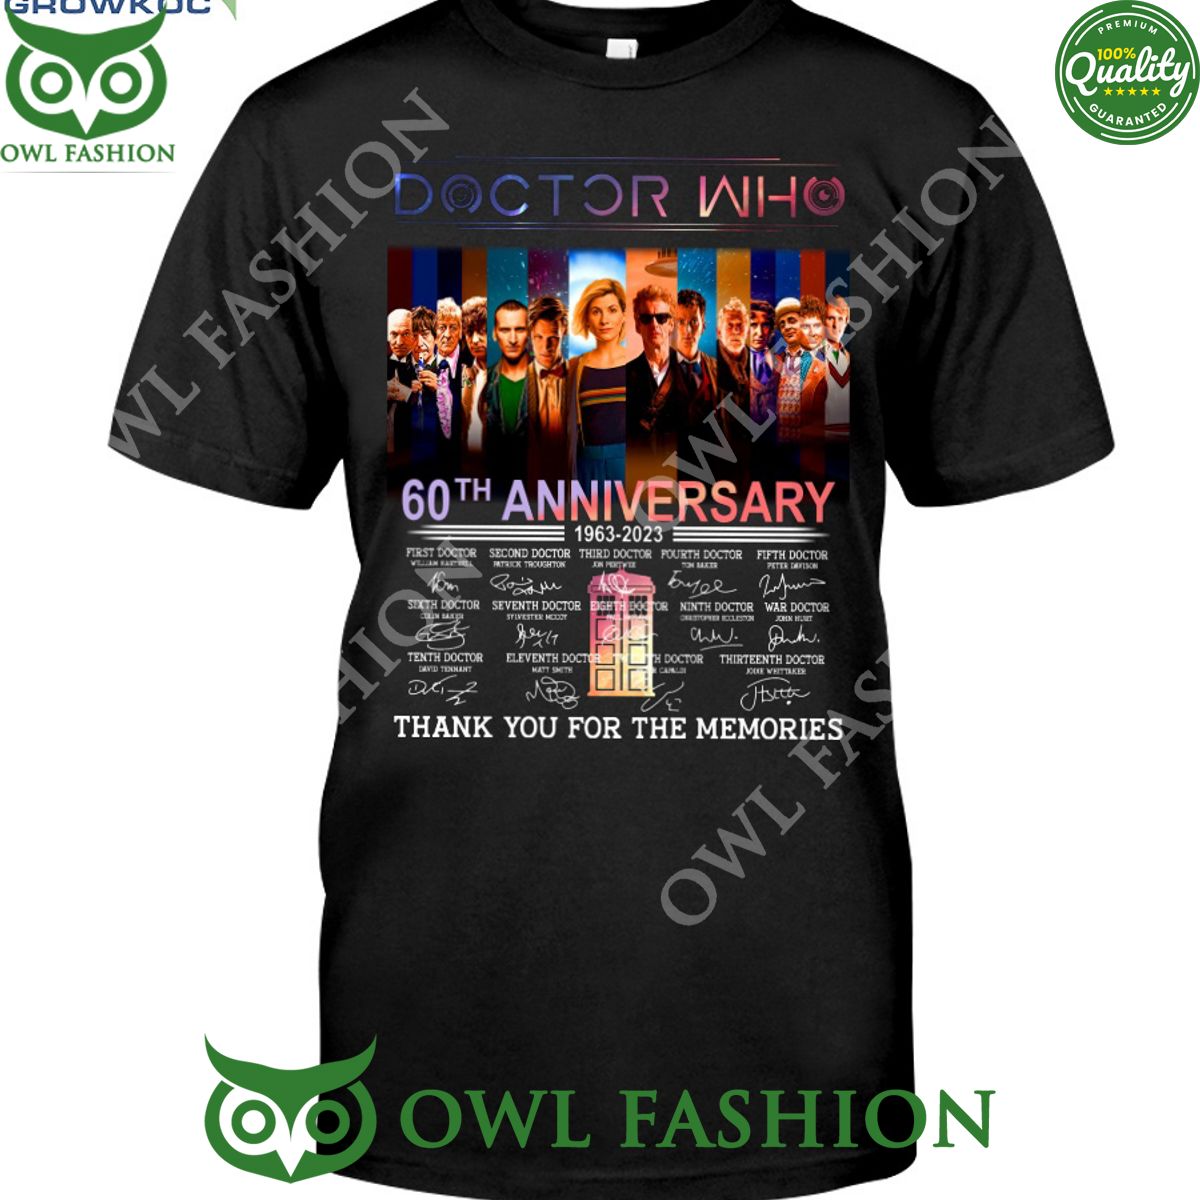 doctor who 60th anniversary 1963 2023 thank you for the memories t shirt 1 rJoaX.jpg